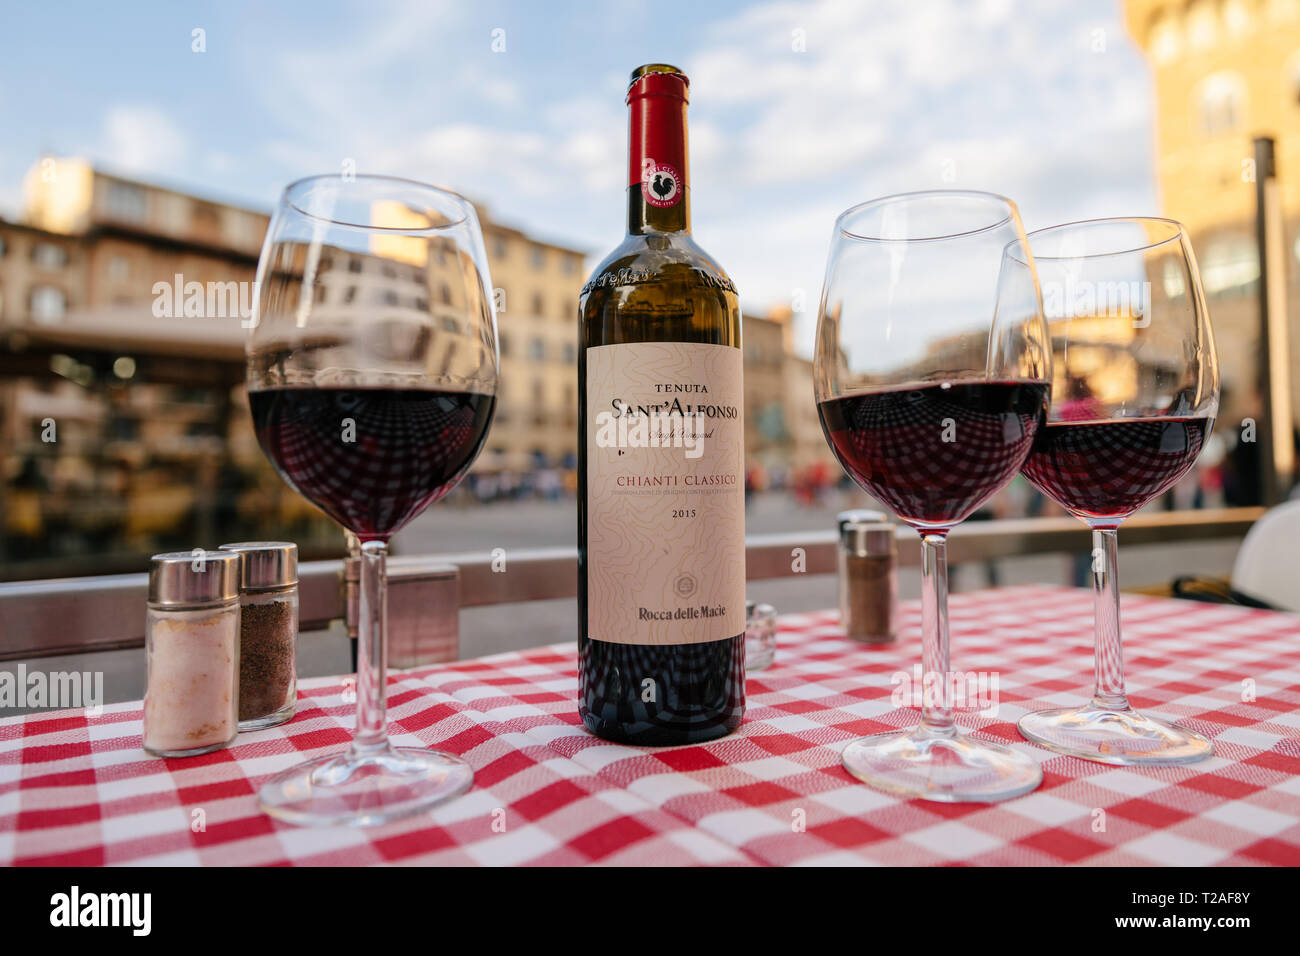 Florence, Italy - June 24, 2018: Closeup of bottle red wine Sant Alfonso Chianti Classico and glasses on table of restaurant on background of Piazza d Stock Photo